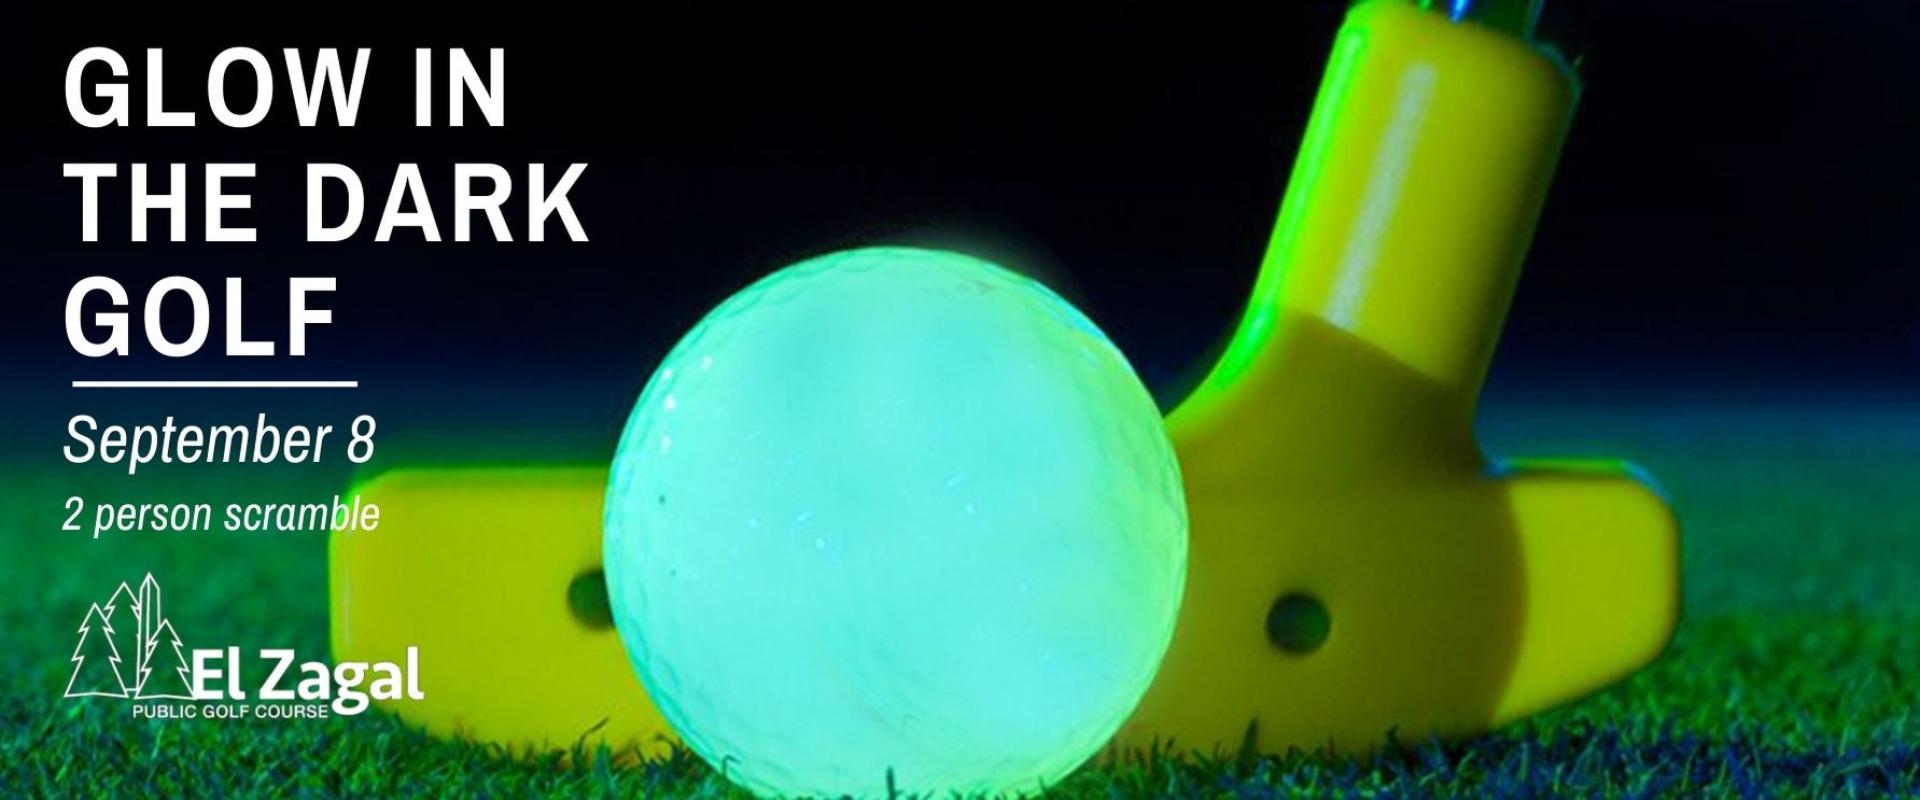 glow in the dark golf ball with text that reads glow in the dark golf September 8, two person scramble